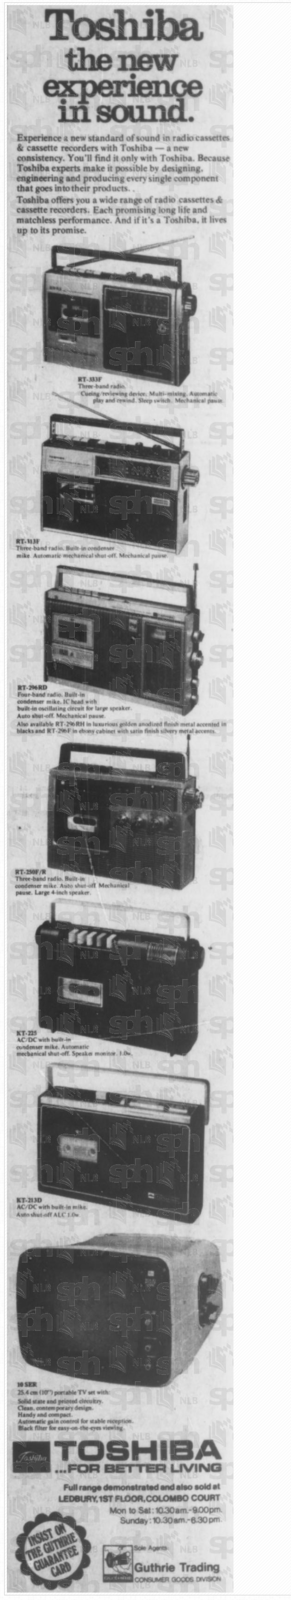 Toshiba RT Boomboxes 1974.png